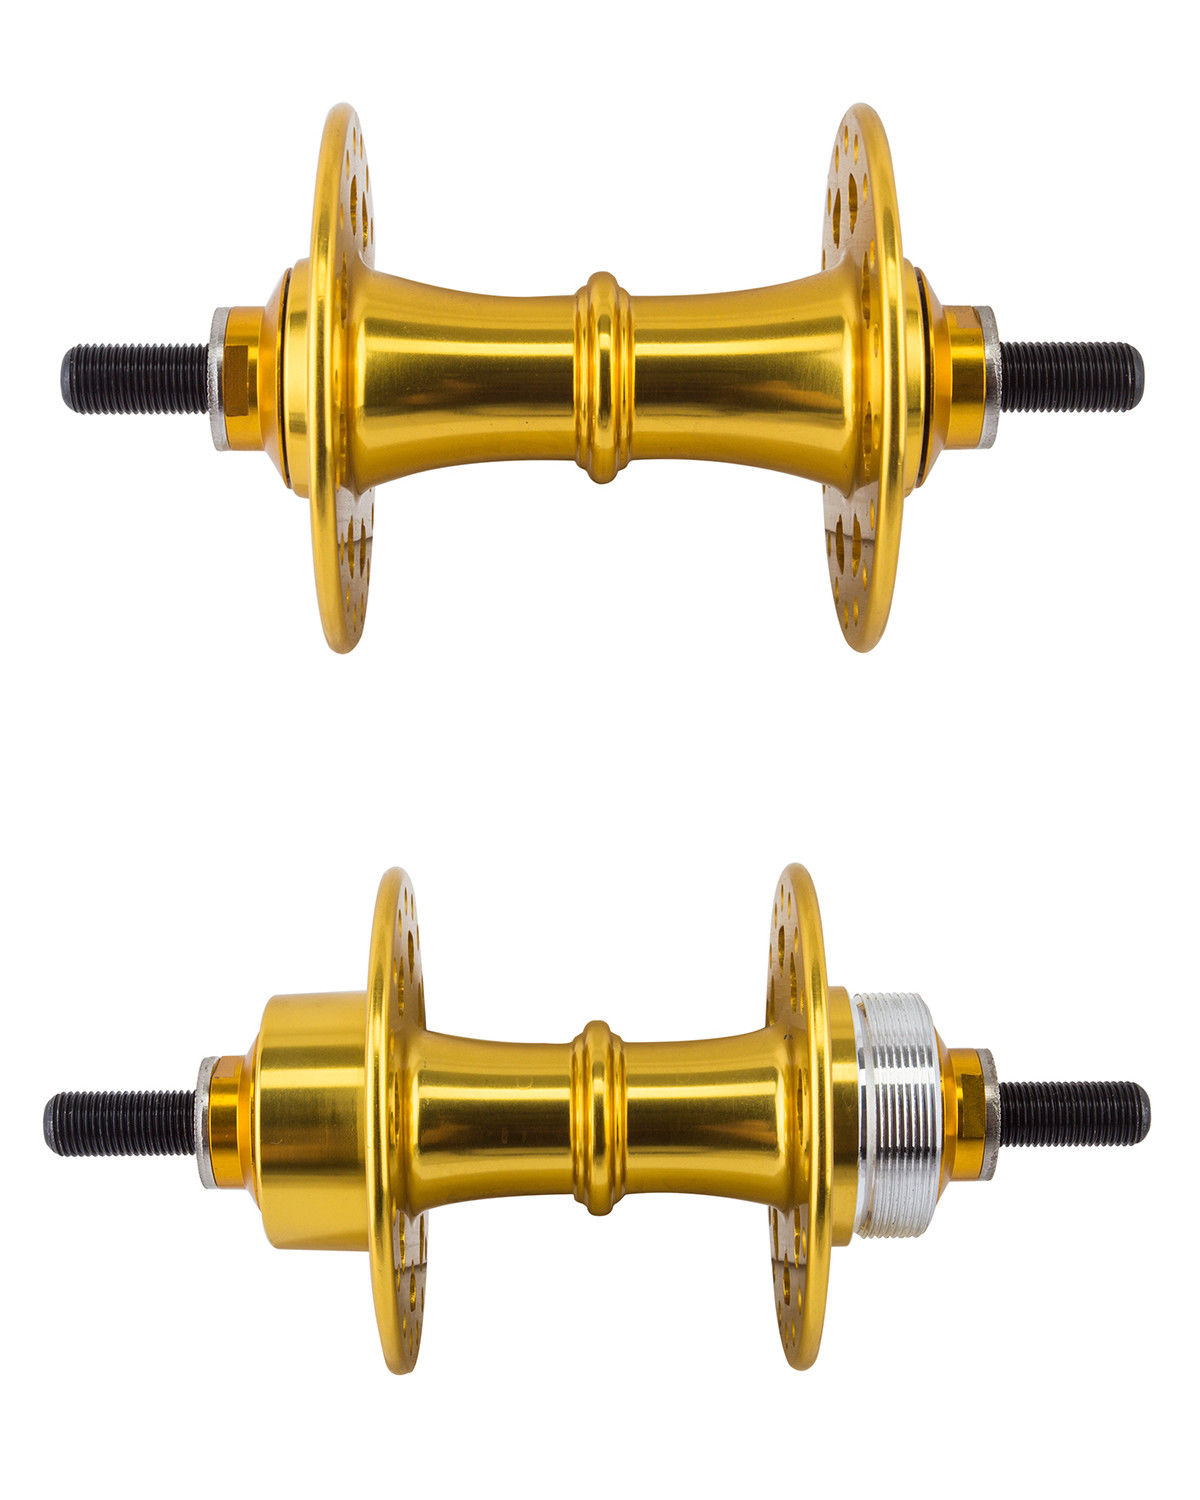 SE Racing High-Flange Sealed Bearing Hubset - 3/8" axles - 36H - Gold Anodized